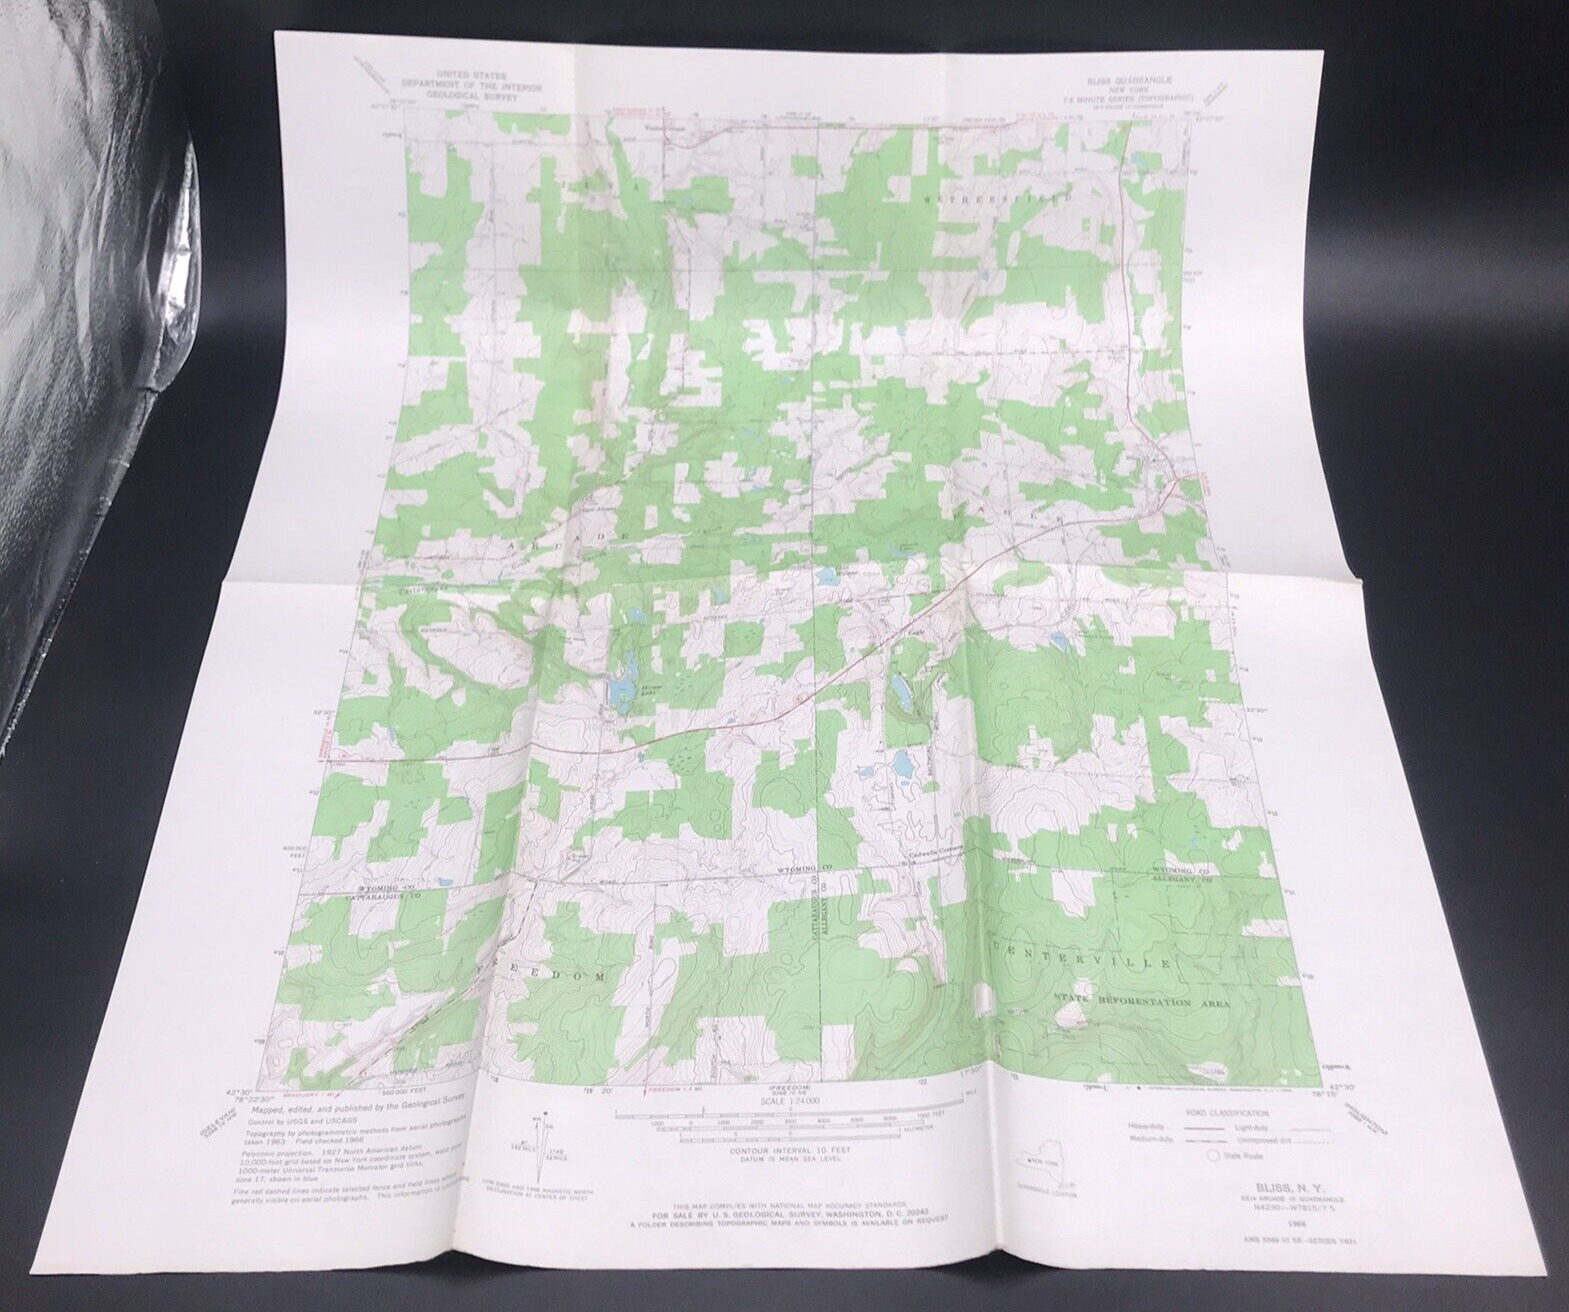 1966 Bliss NY Quadrangle Geological Survey Topographical Map 22\